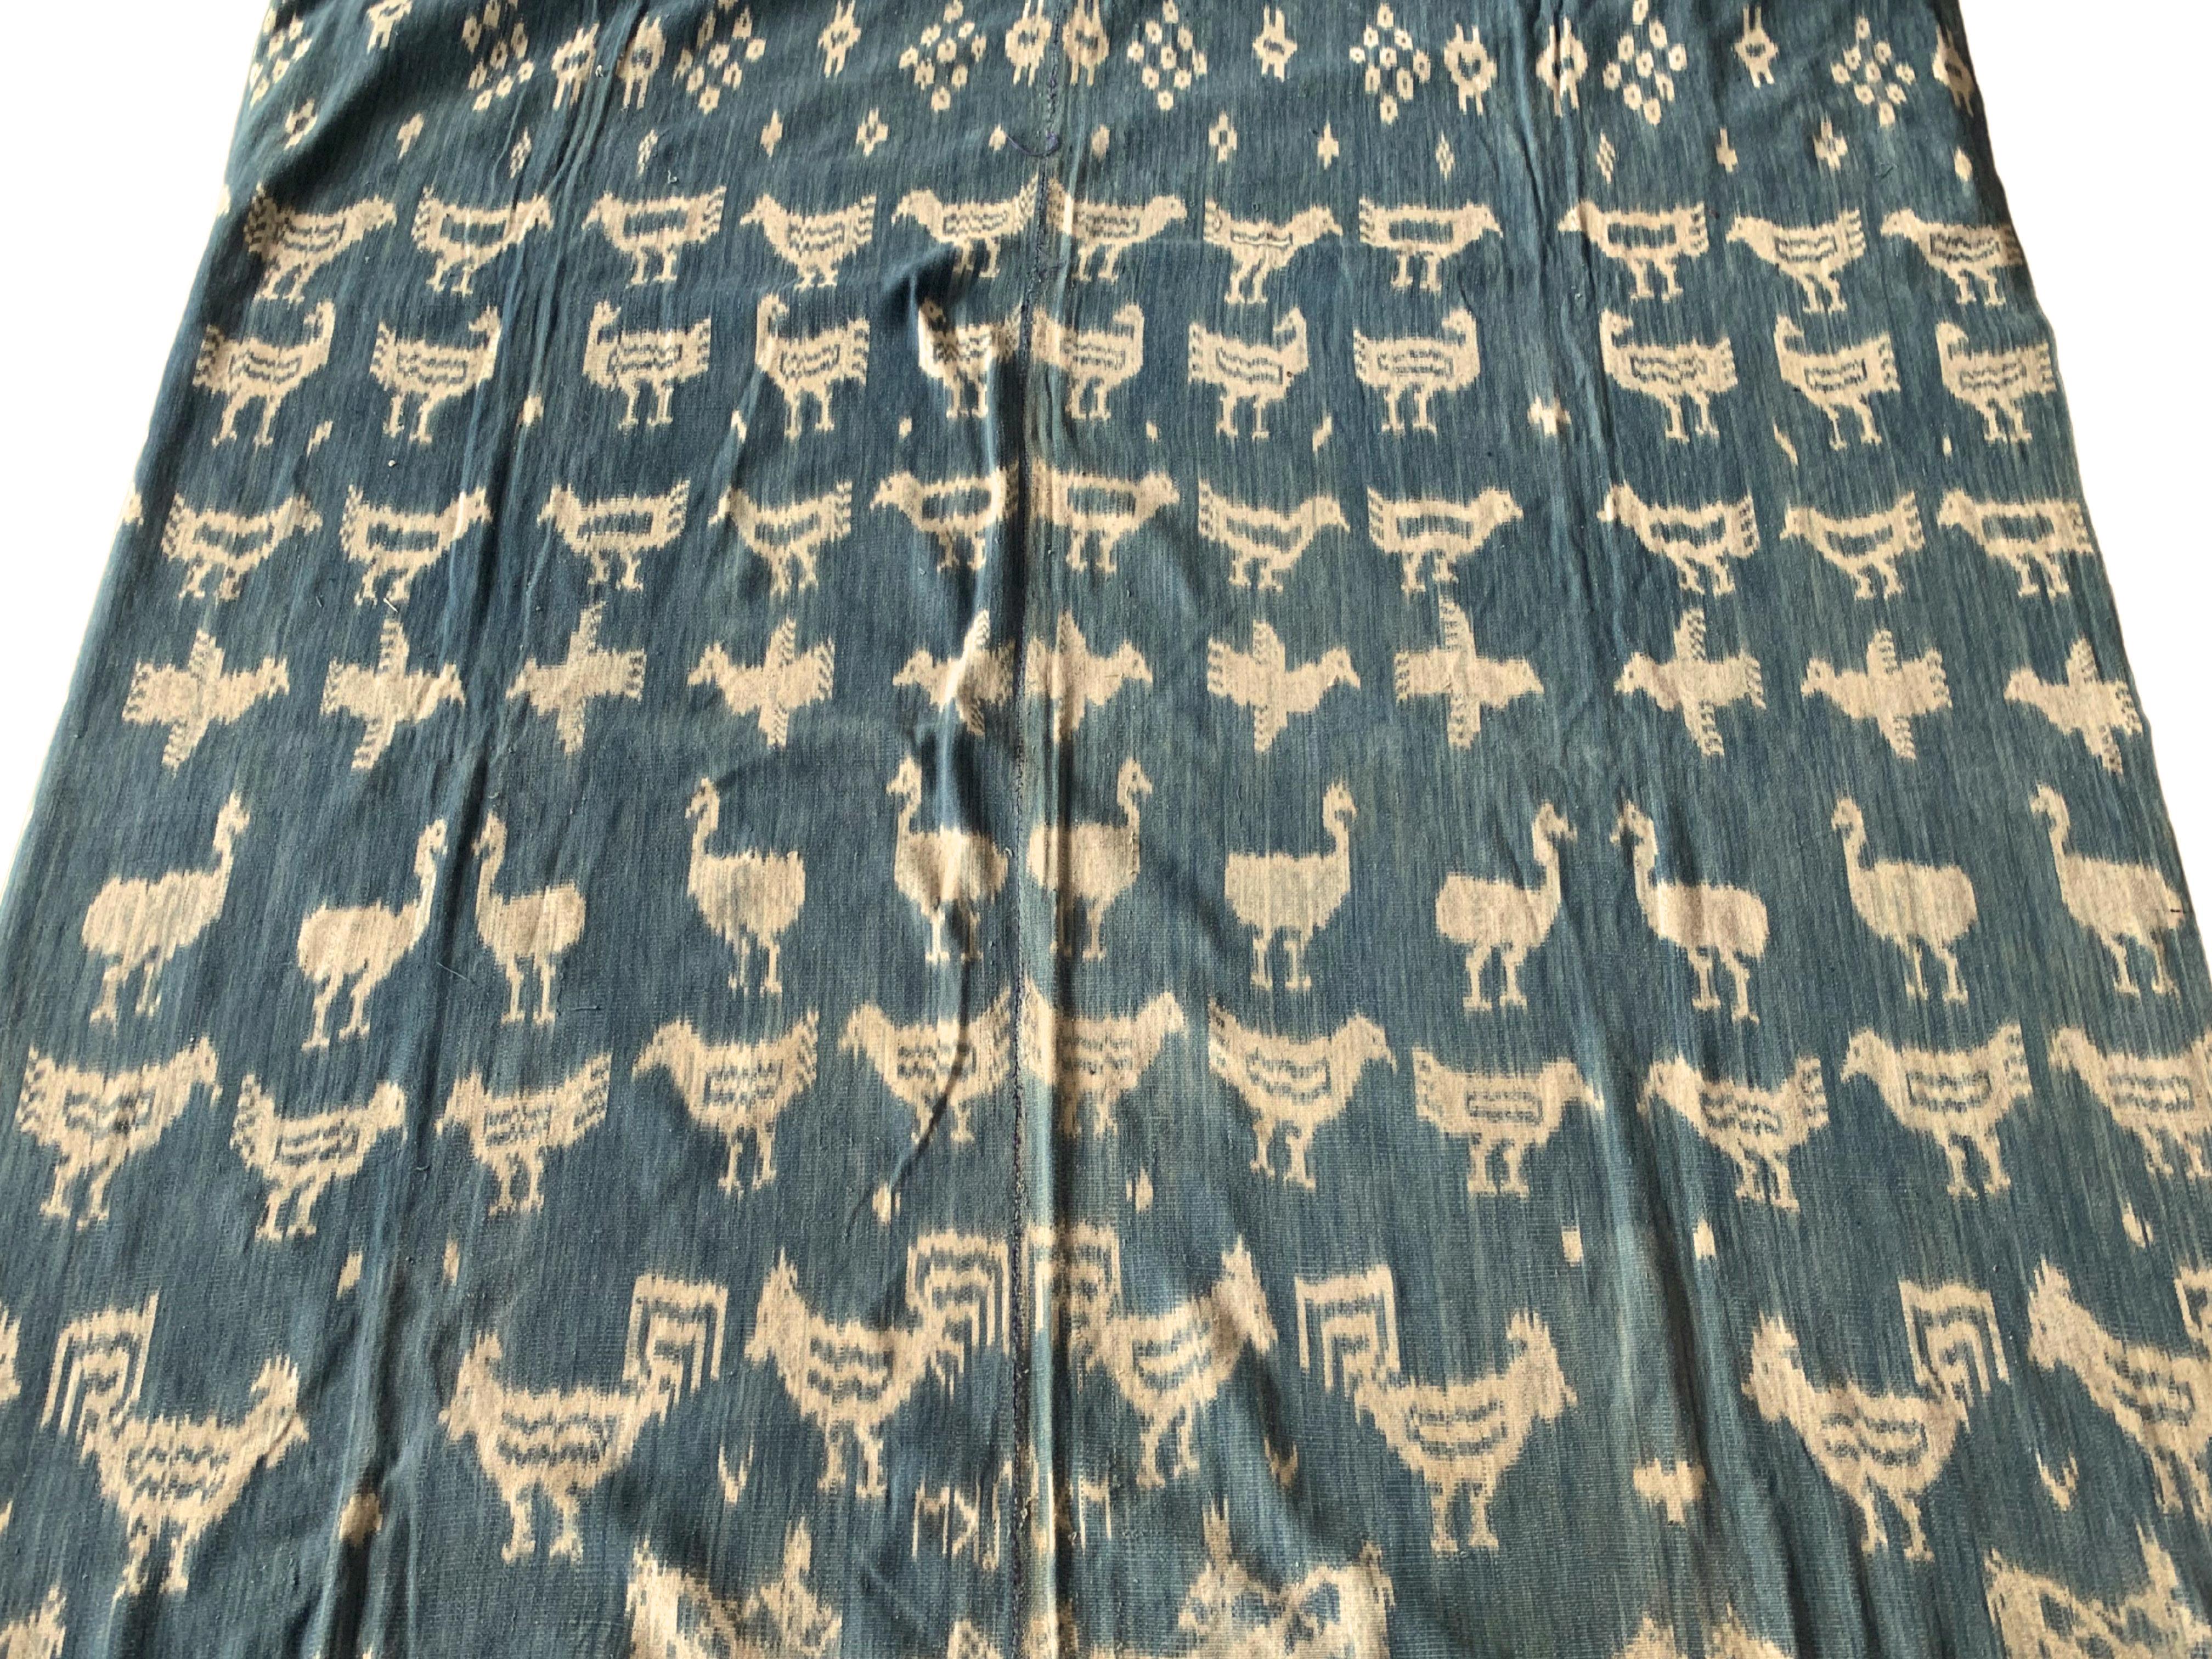 Indonesian Extravagant and very long Ikat Textile from Sumba Island, Indonesia